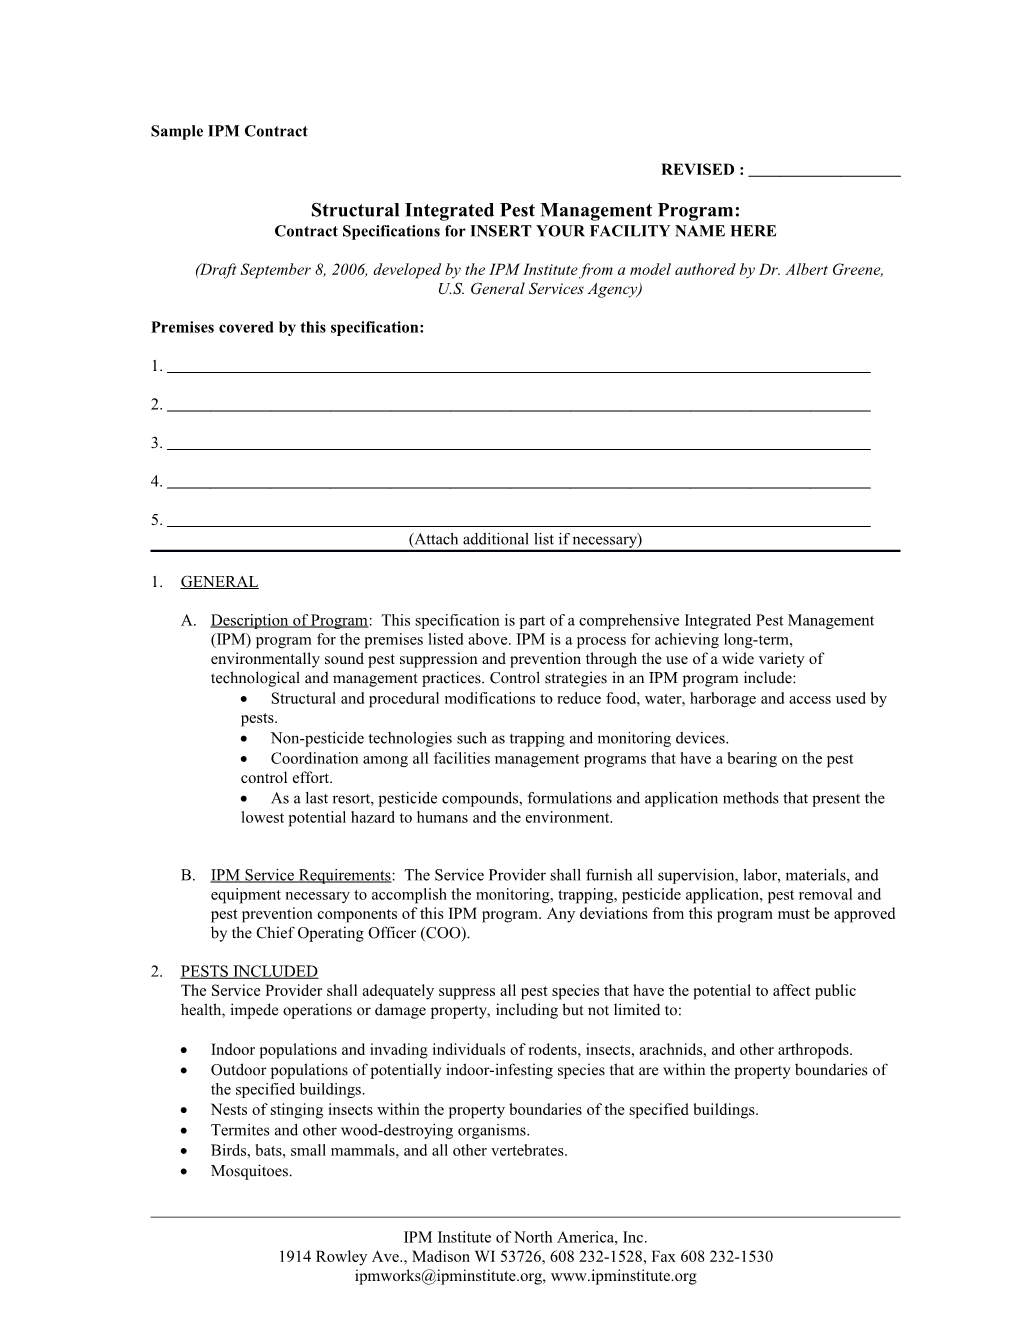 Sample IPM Contract